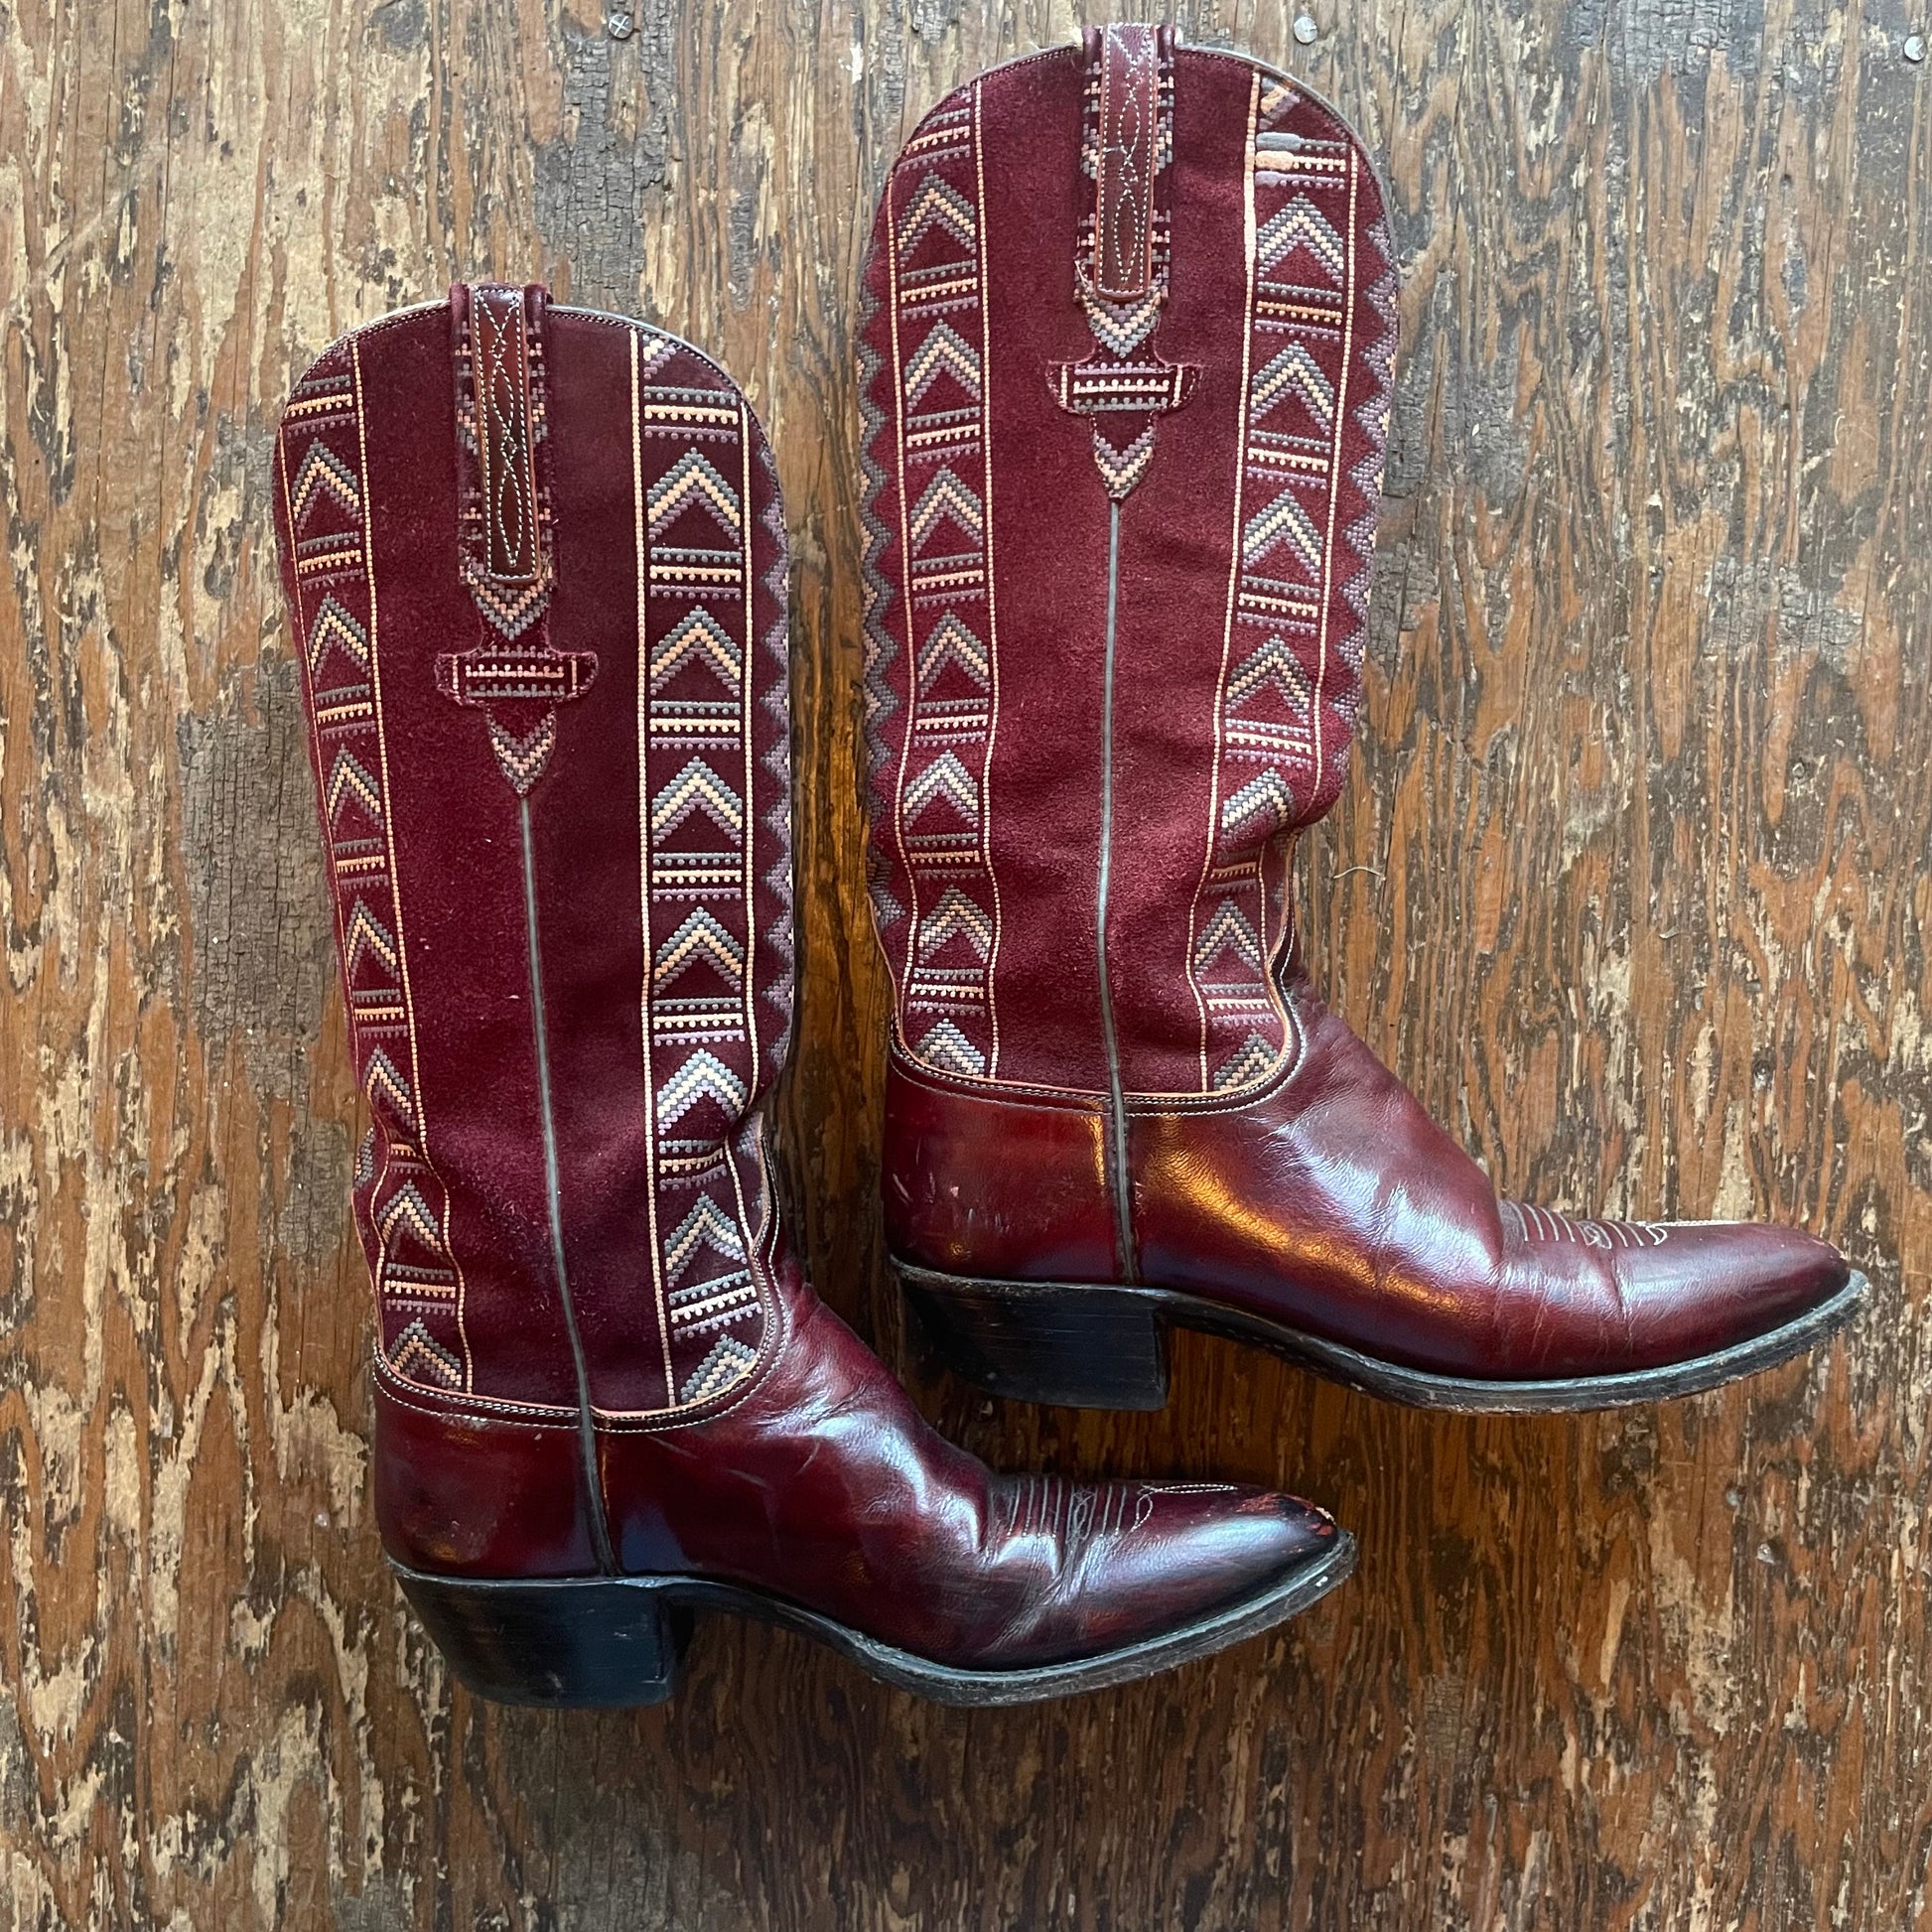 Vintage Lucchese Cowboy Boots Oxblood Red Woven Suede Womens Size